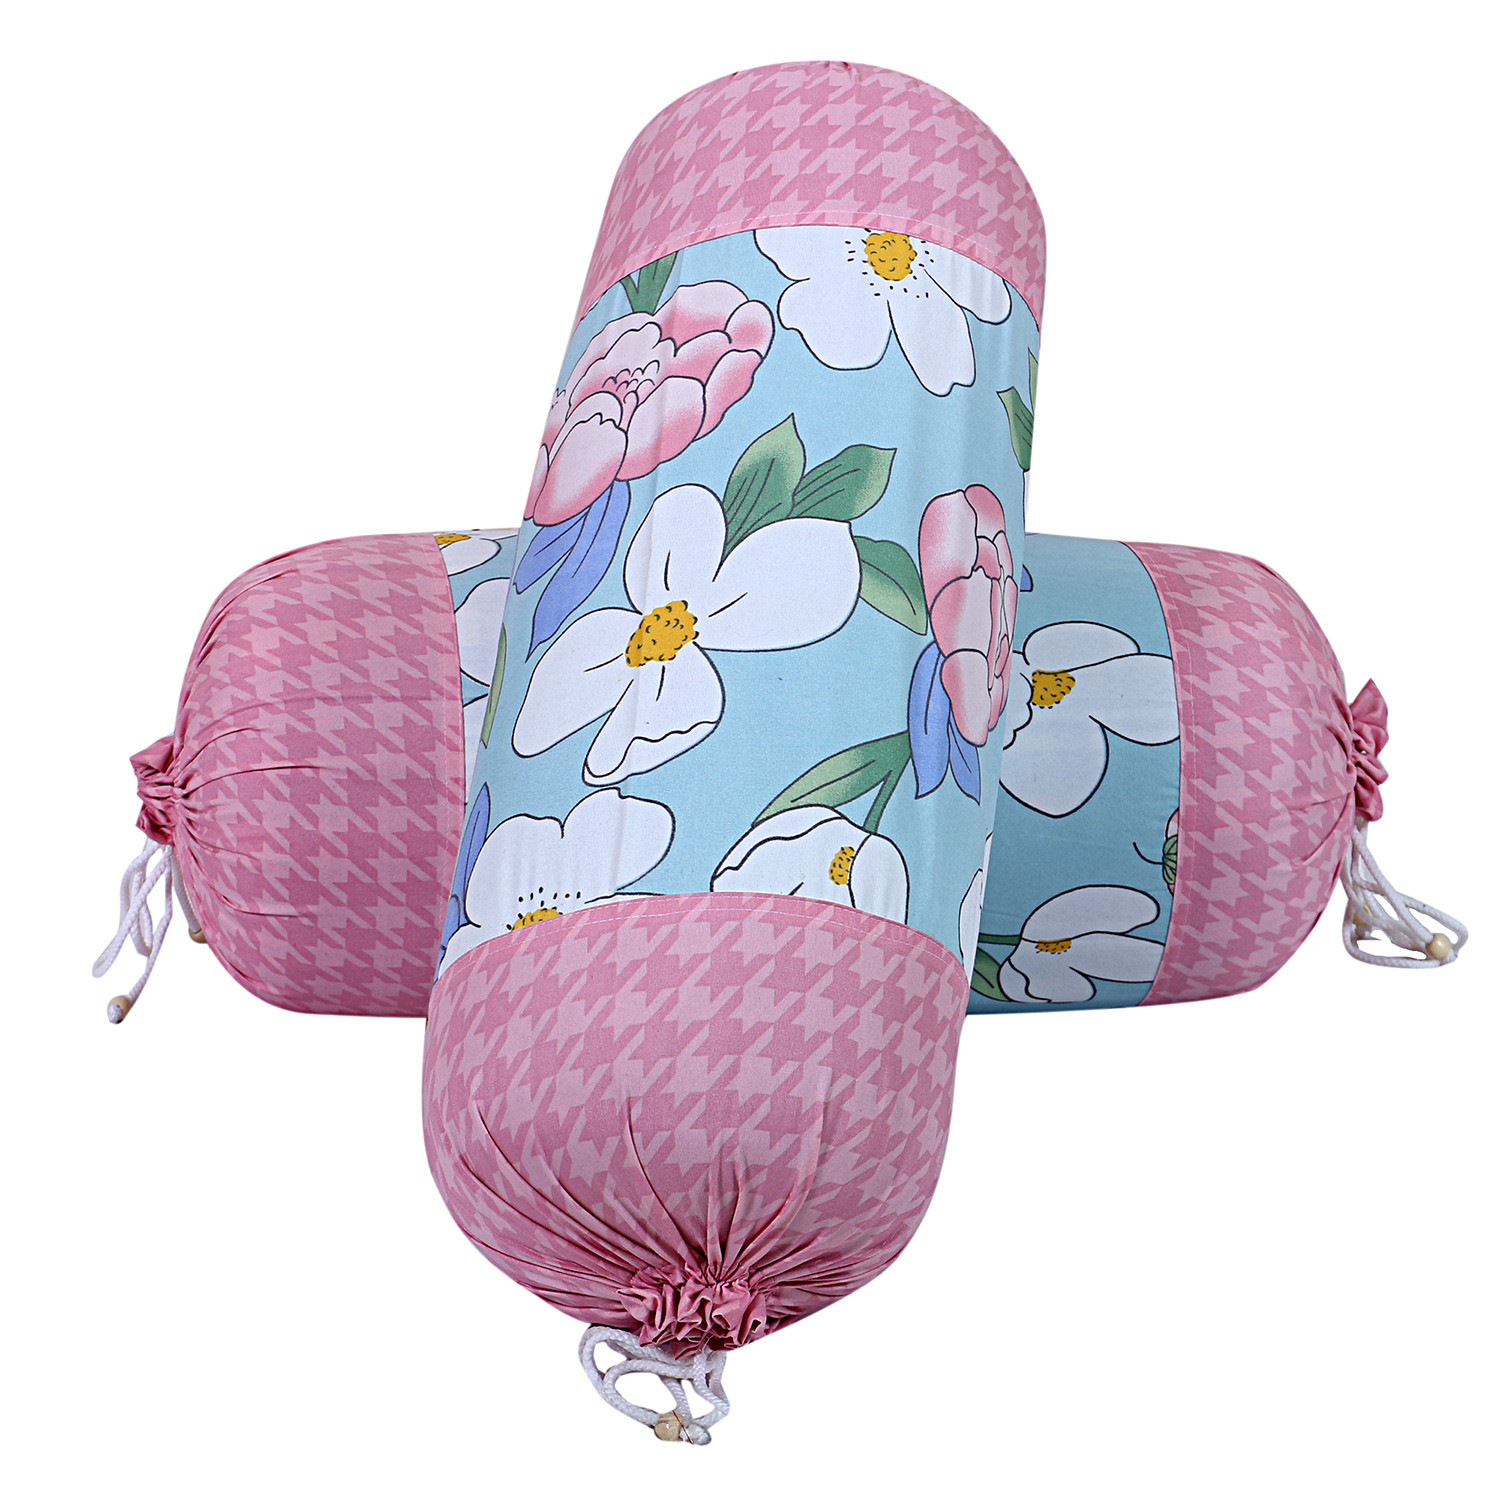 Kuber Industries Cotton Flower Print Attractive Bolster Cover With Drawstring for Home Décor,(Pink)